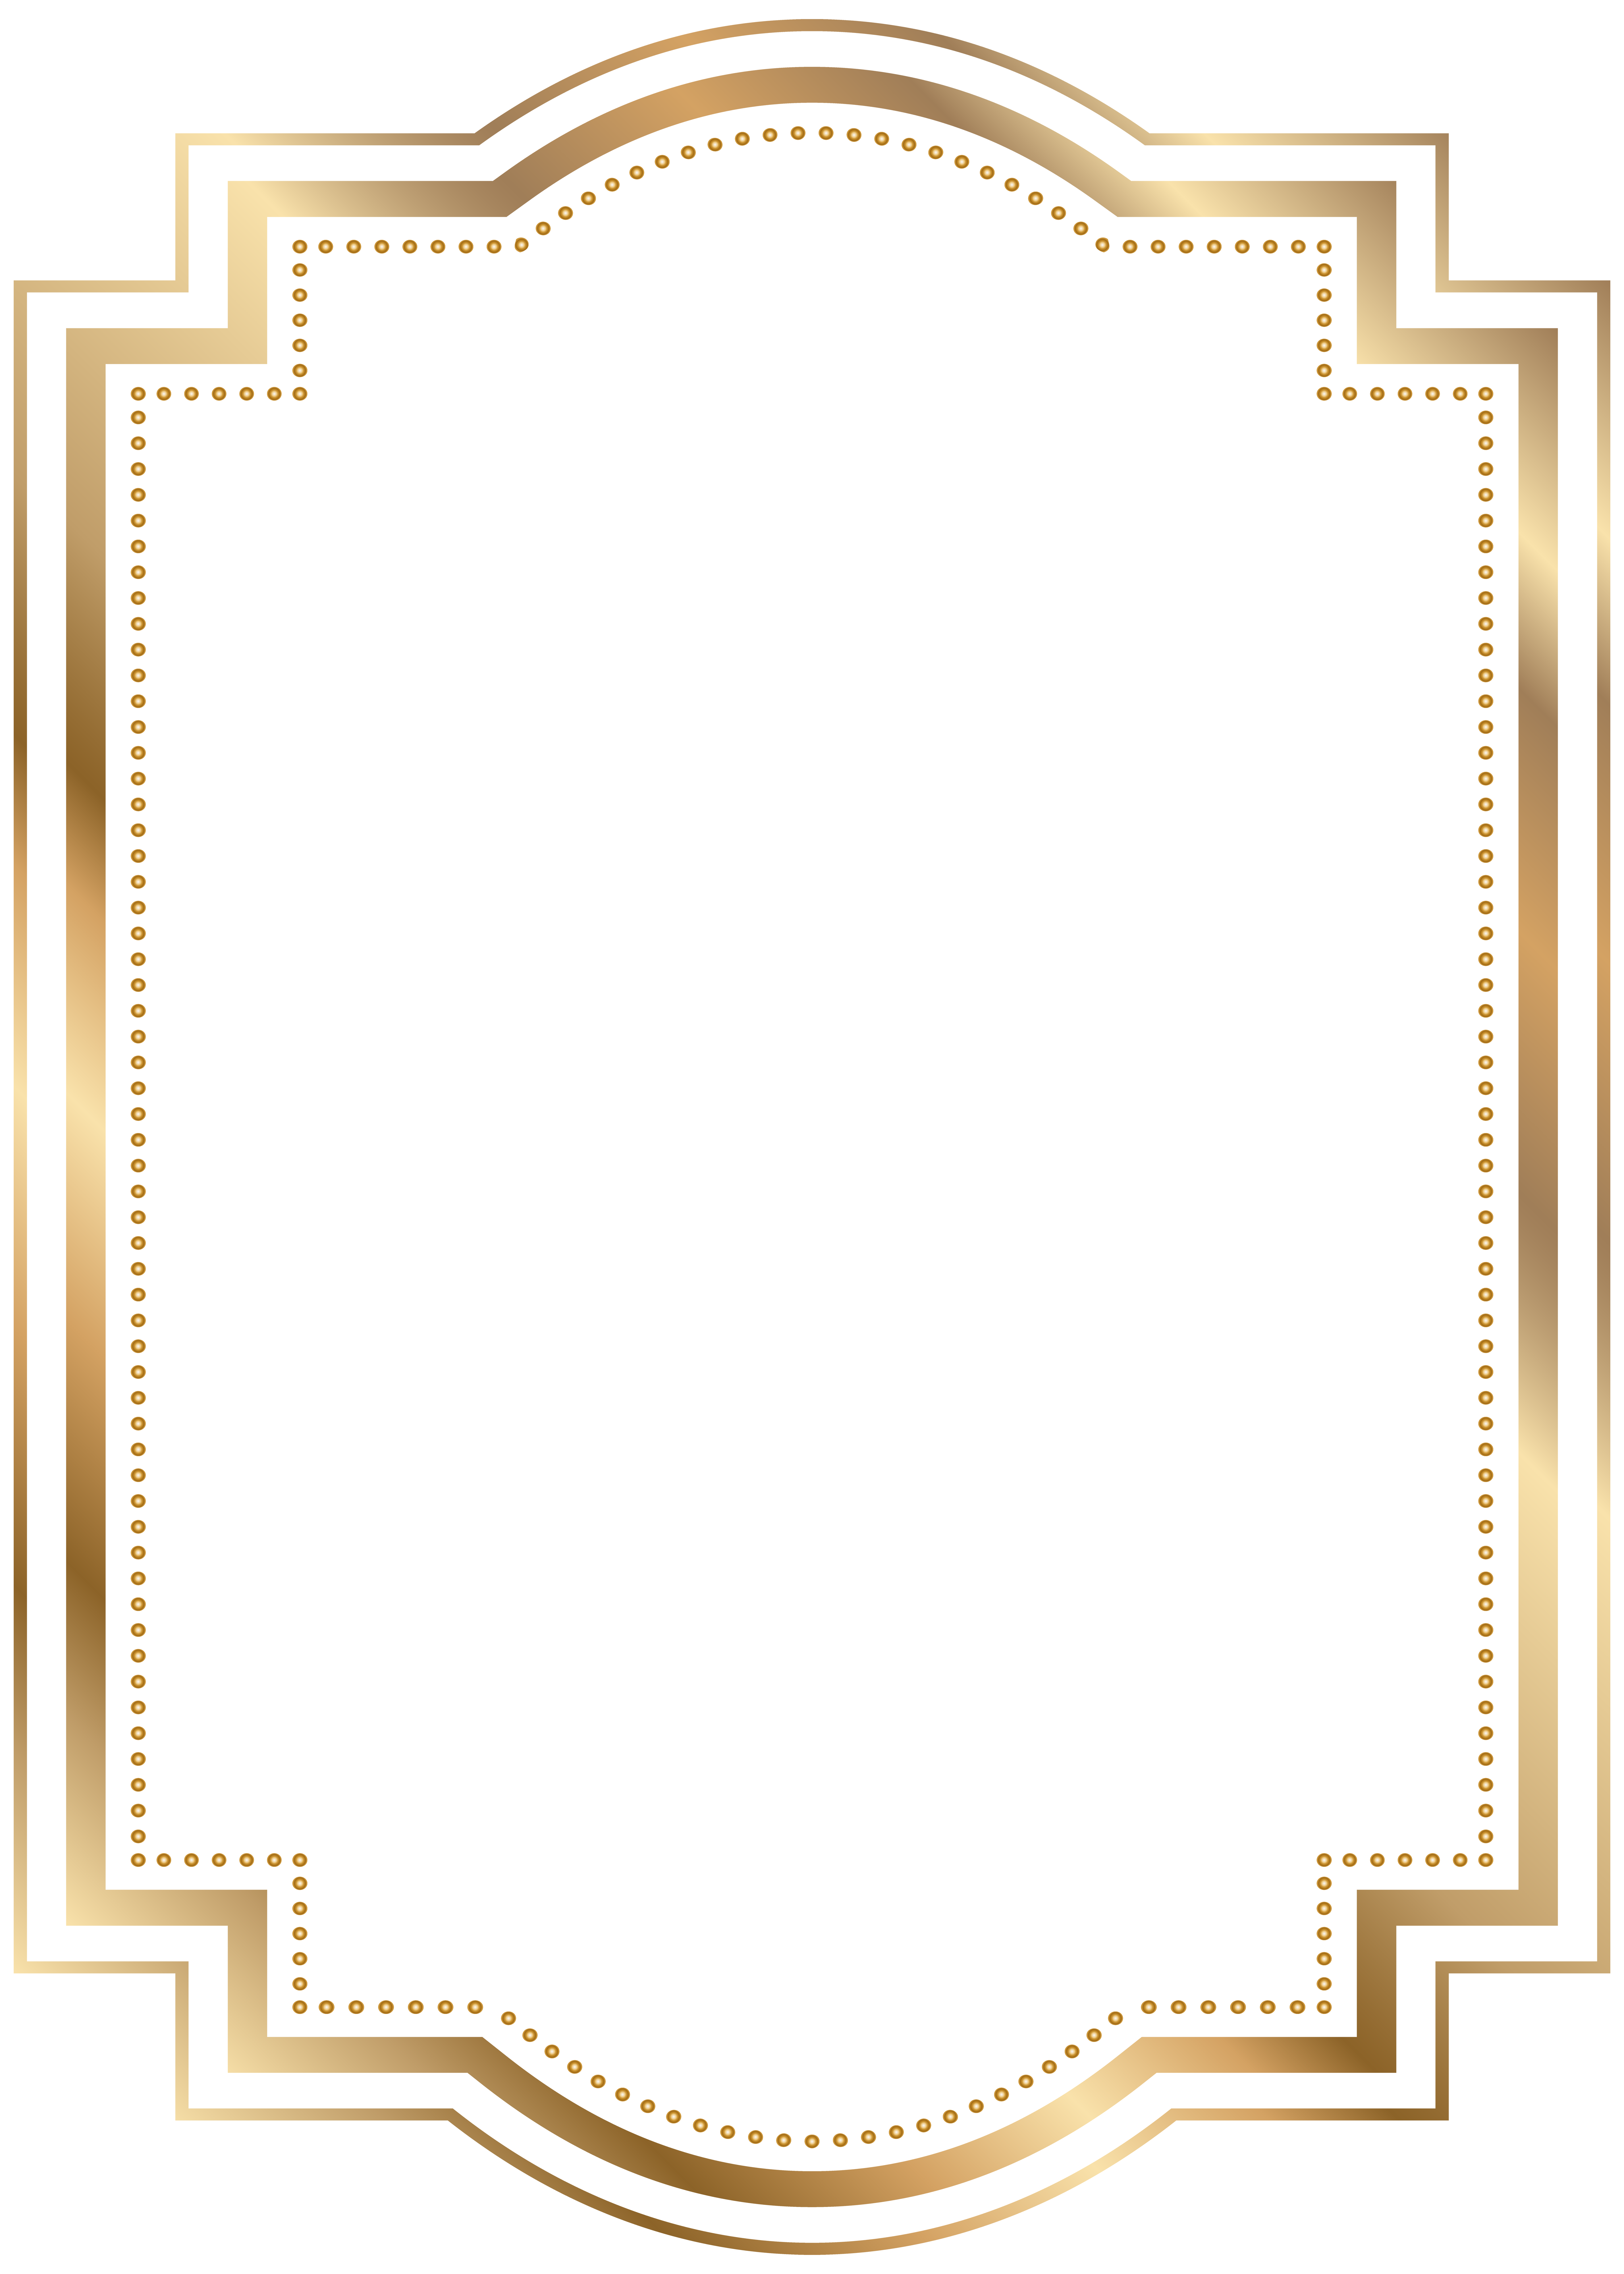 Definition Gold Dictionary Pattern Frame English Border Clipart